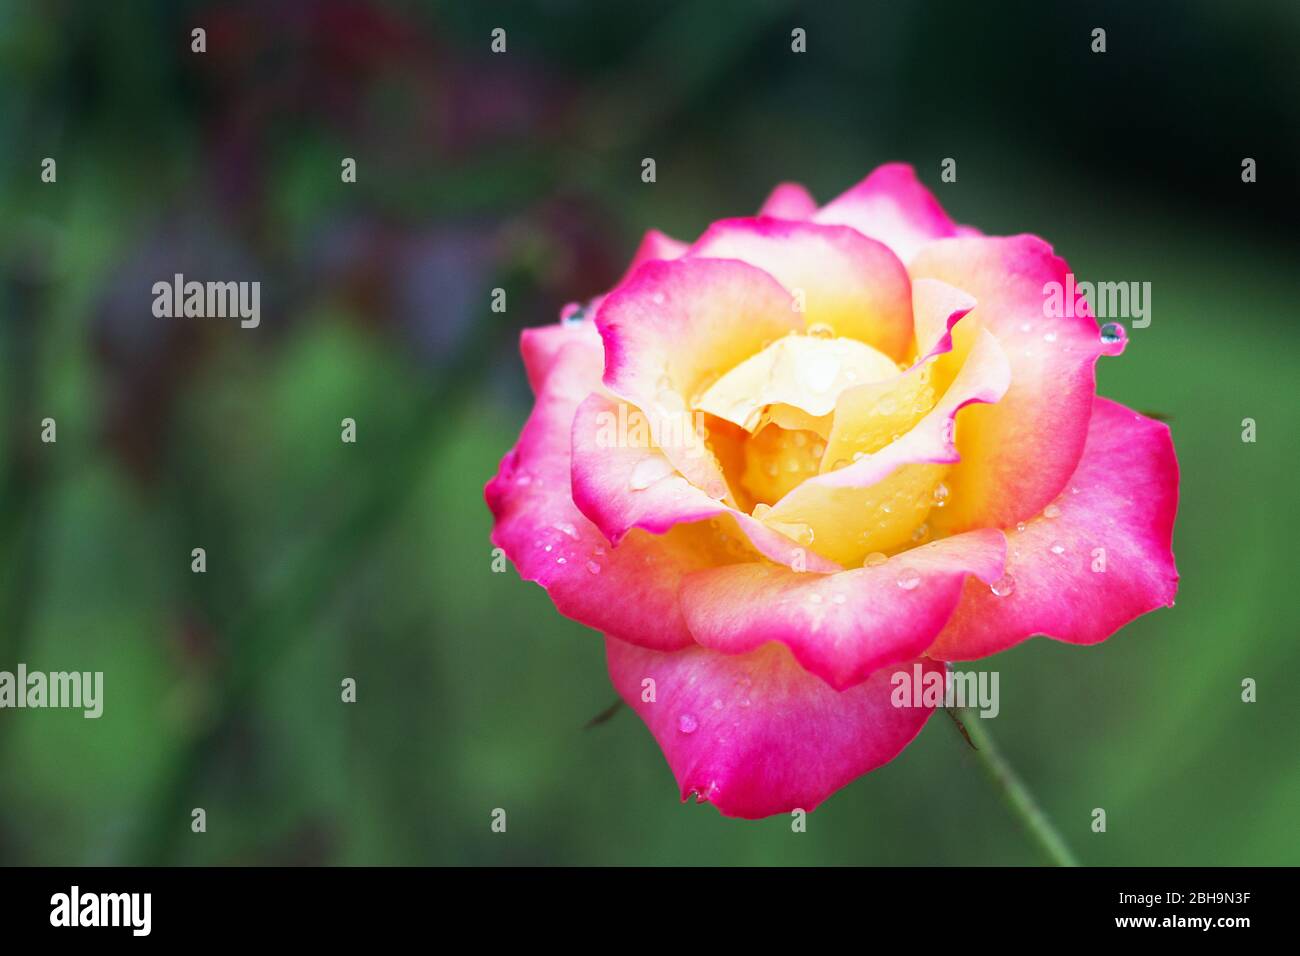 Close-up shot of romantic beautiful pink hybrid tea rose blooming in early autumn of suburban landscape. Stock Photo